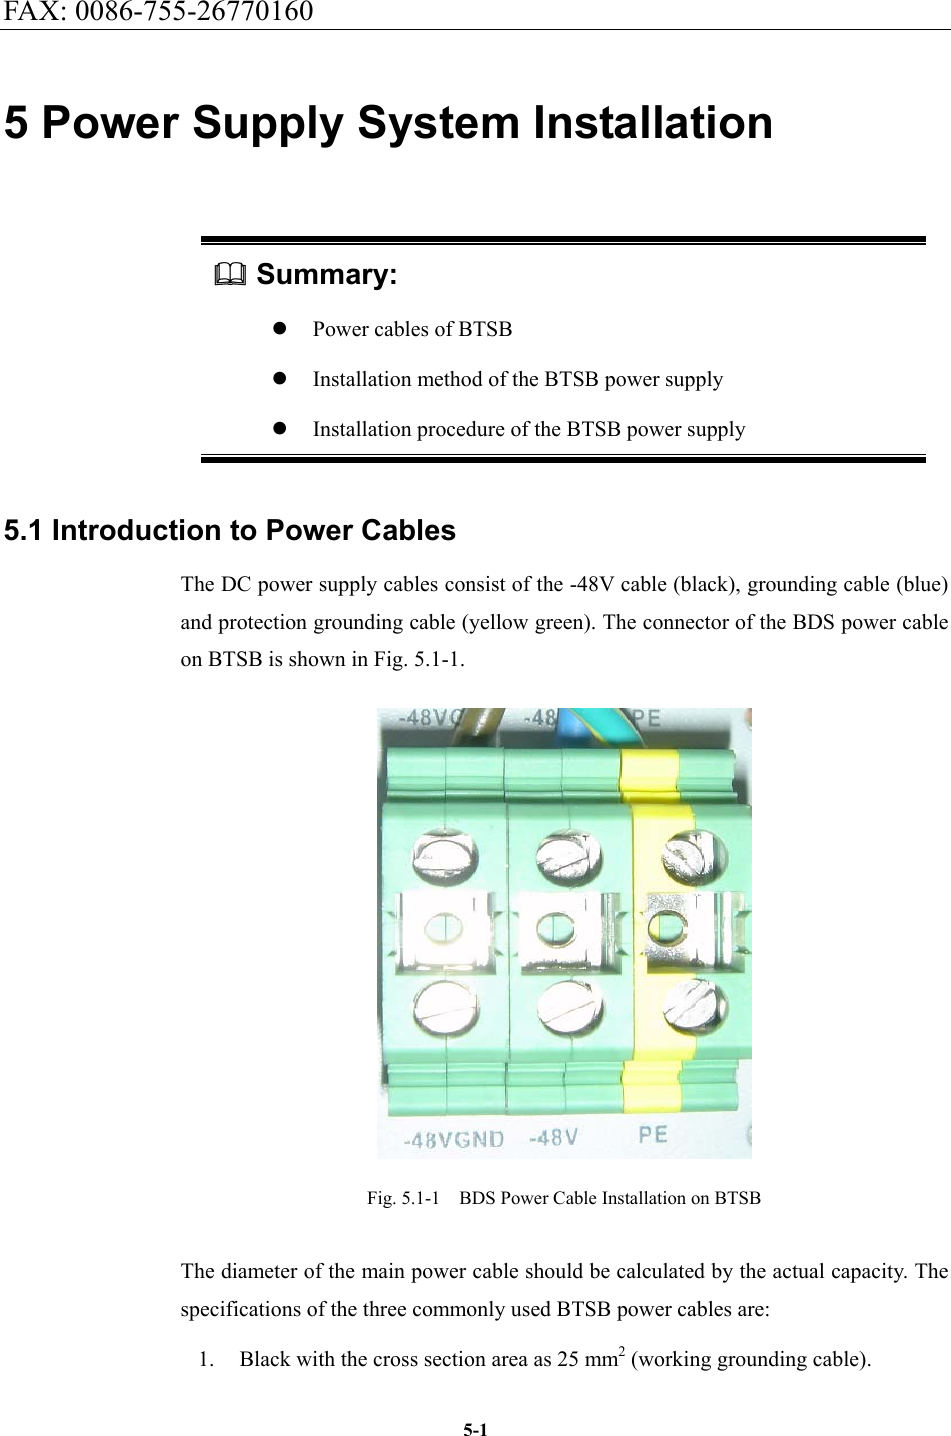 FAX: 0086-755-26770160  5-15 Power Supply System Installation  Summary: z Power cables of BTSB z Installation method of the BTSB power supply z Installation procedure of the BTSB power supply 5.1 Introduction to Power Cables The DC power supply cables consist of the -48V cable (black), grounding cable (blue) and protection grounding cable (yellow green). The connector of the BDS power cable on BTSB is shown in Fig. 5.1-1.    Fig. 5.1-1  BDS Power Cable Installation on BTSB The diameter of the main power cable should be calculated by the actual capacity. The specifications of the three commonly used BTSB power cables are:   1.  Black with the cross section area as 25 mm2 (working grounding cable).   